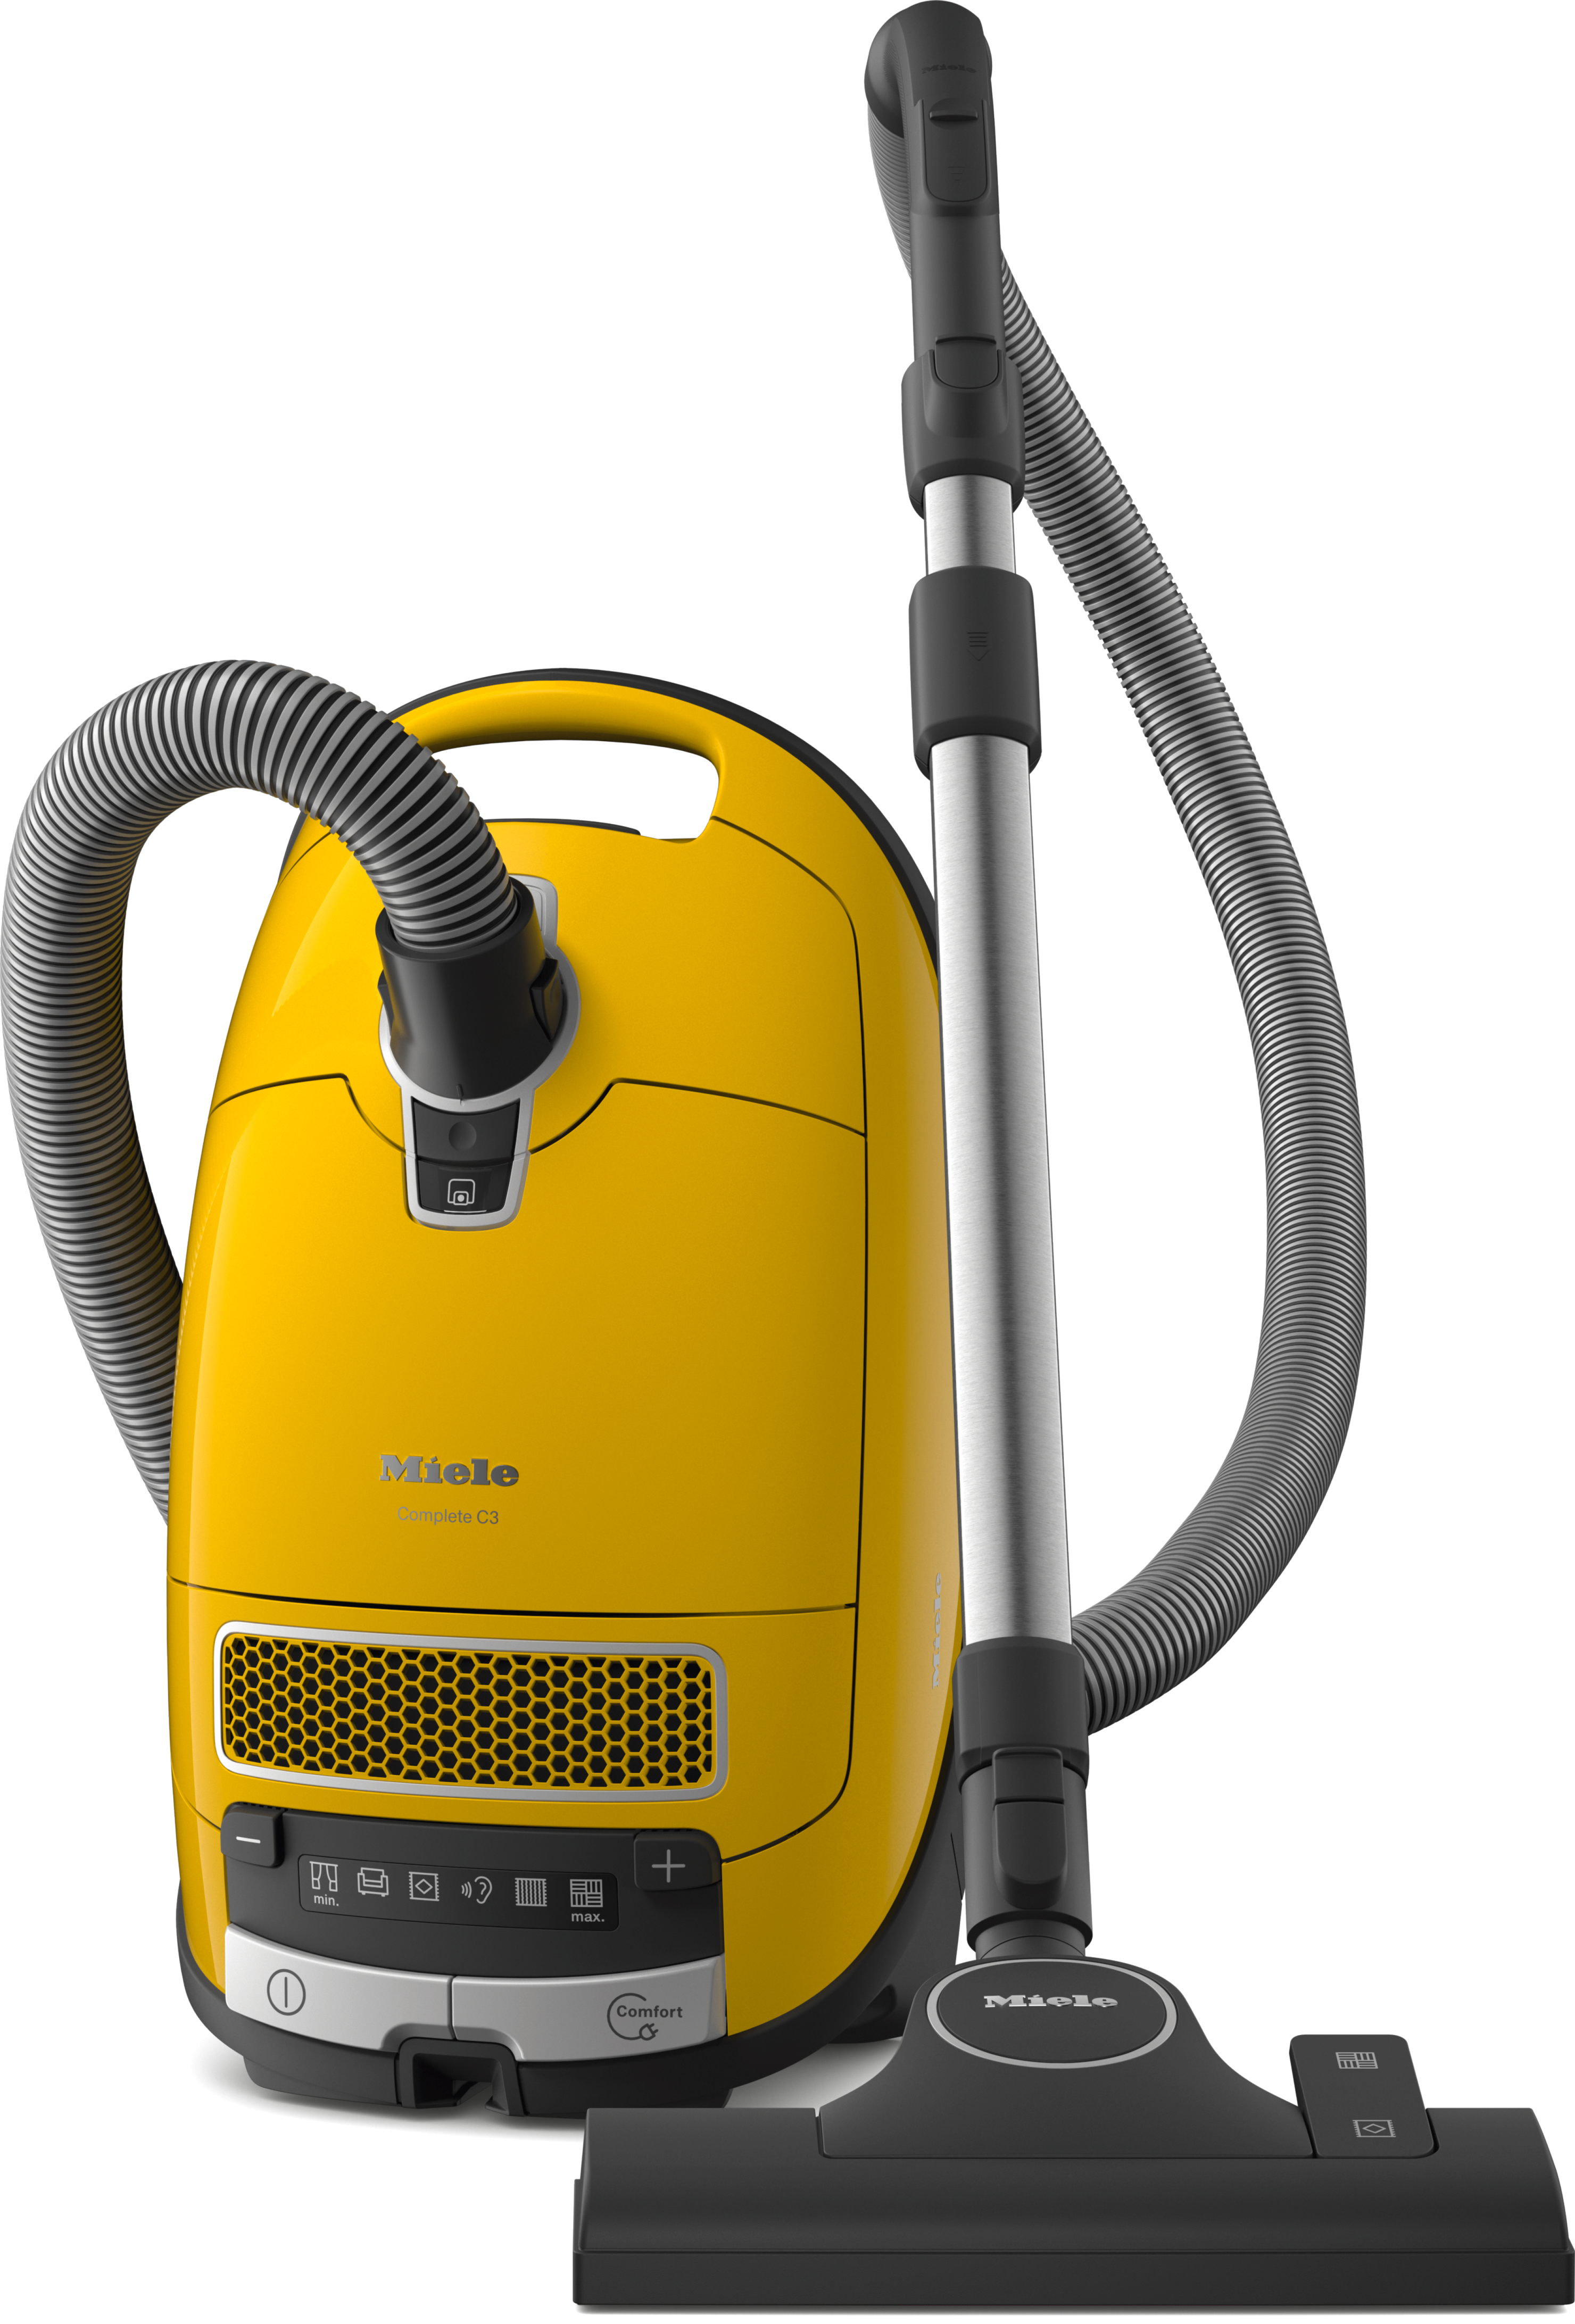 Complete C3 FlexCylinder vacuum cleaner with highly efficient motor for energy-efficient vacuuming.